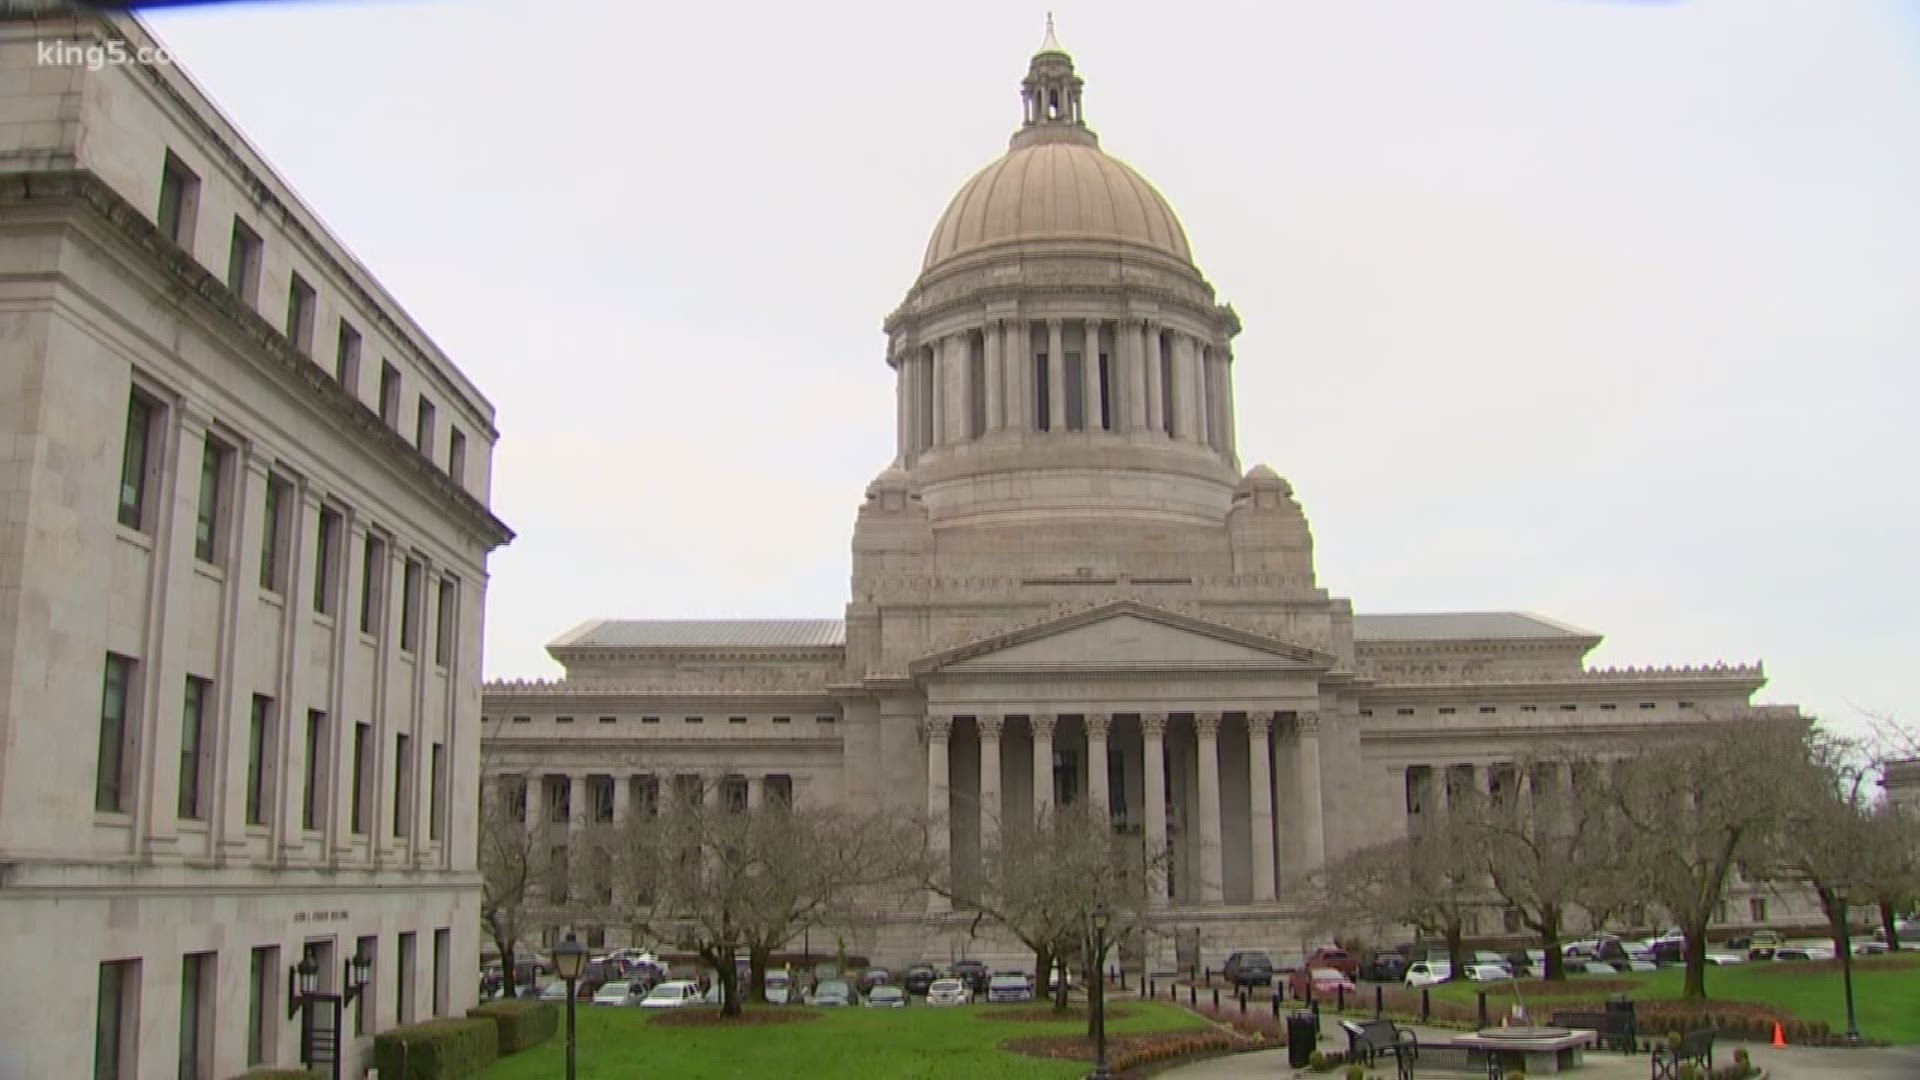 New taxes could be coming to the state to pay for everything from pre-school students, to the homeless. The latest budget proposal calls for a tax on the state's top investment earners, and certain businesses. South Bureau Chief Drew Mikkelsen talked to sponsors, and critics of the House budget proposal released today.